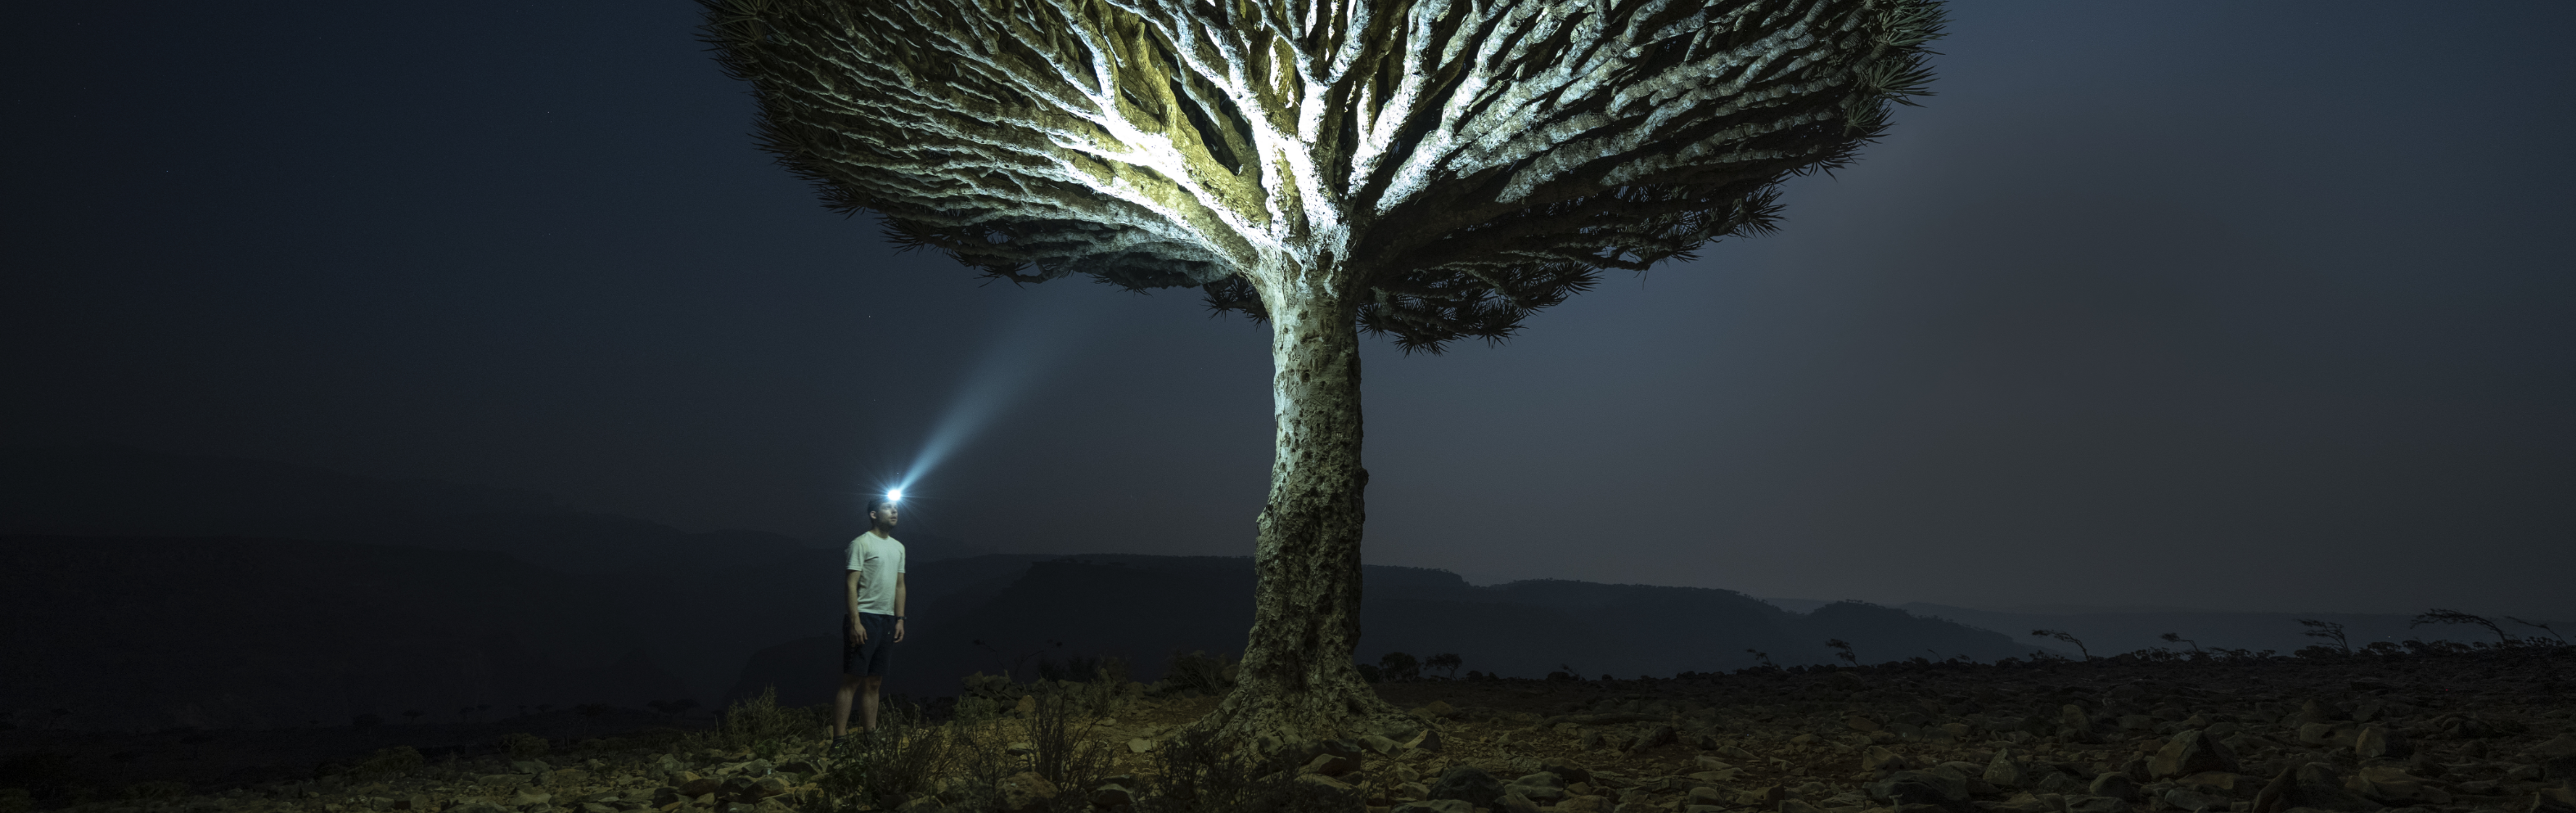 A man is standing under a tree using a headlamp